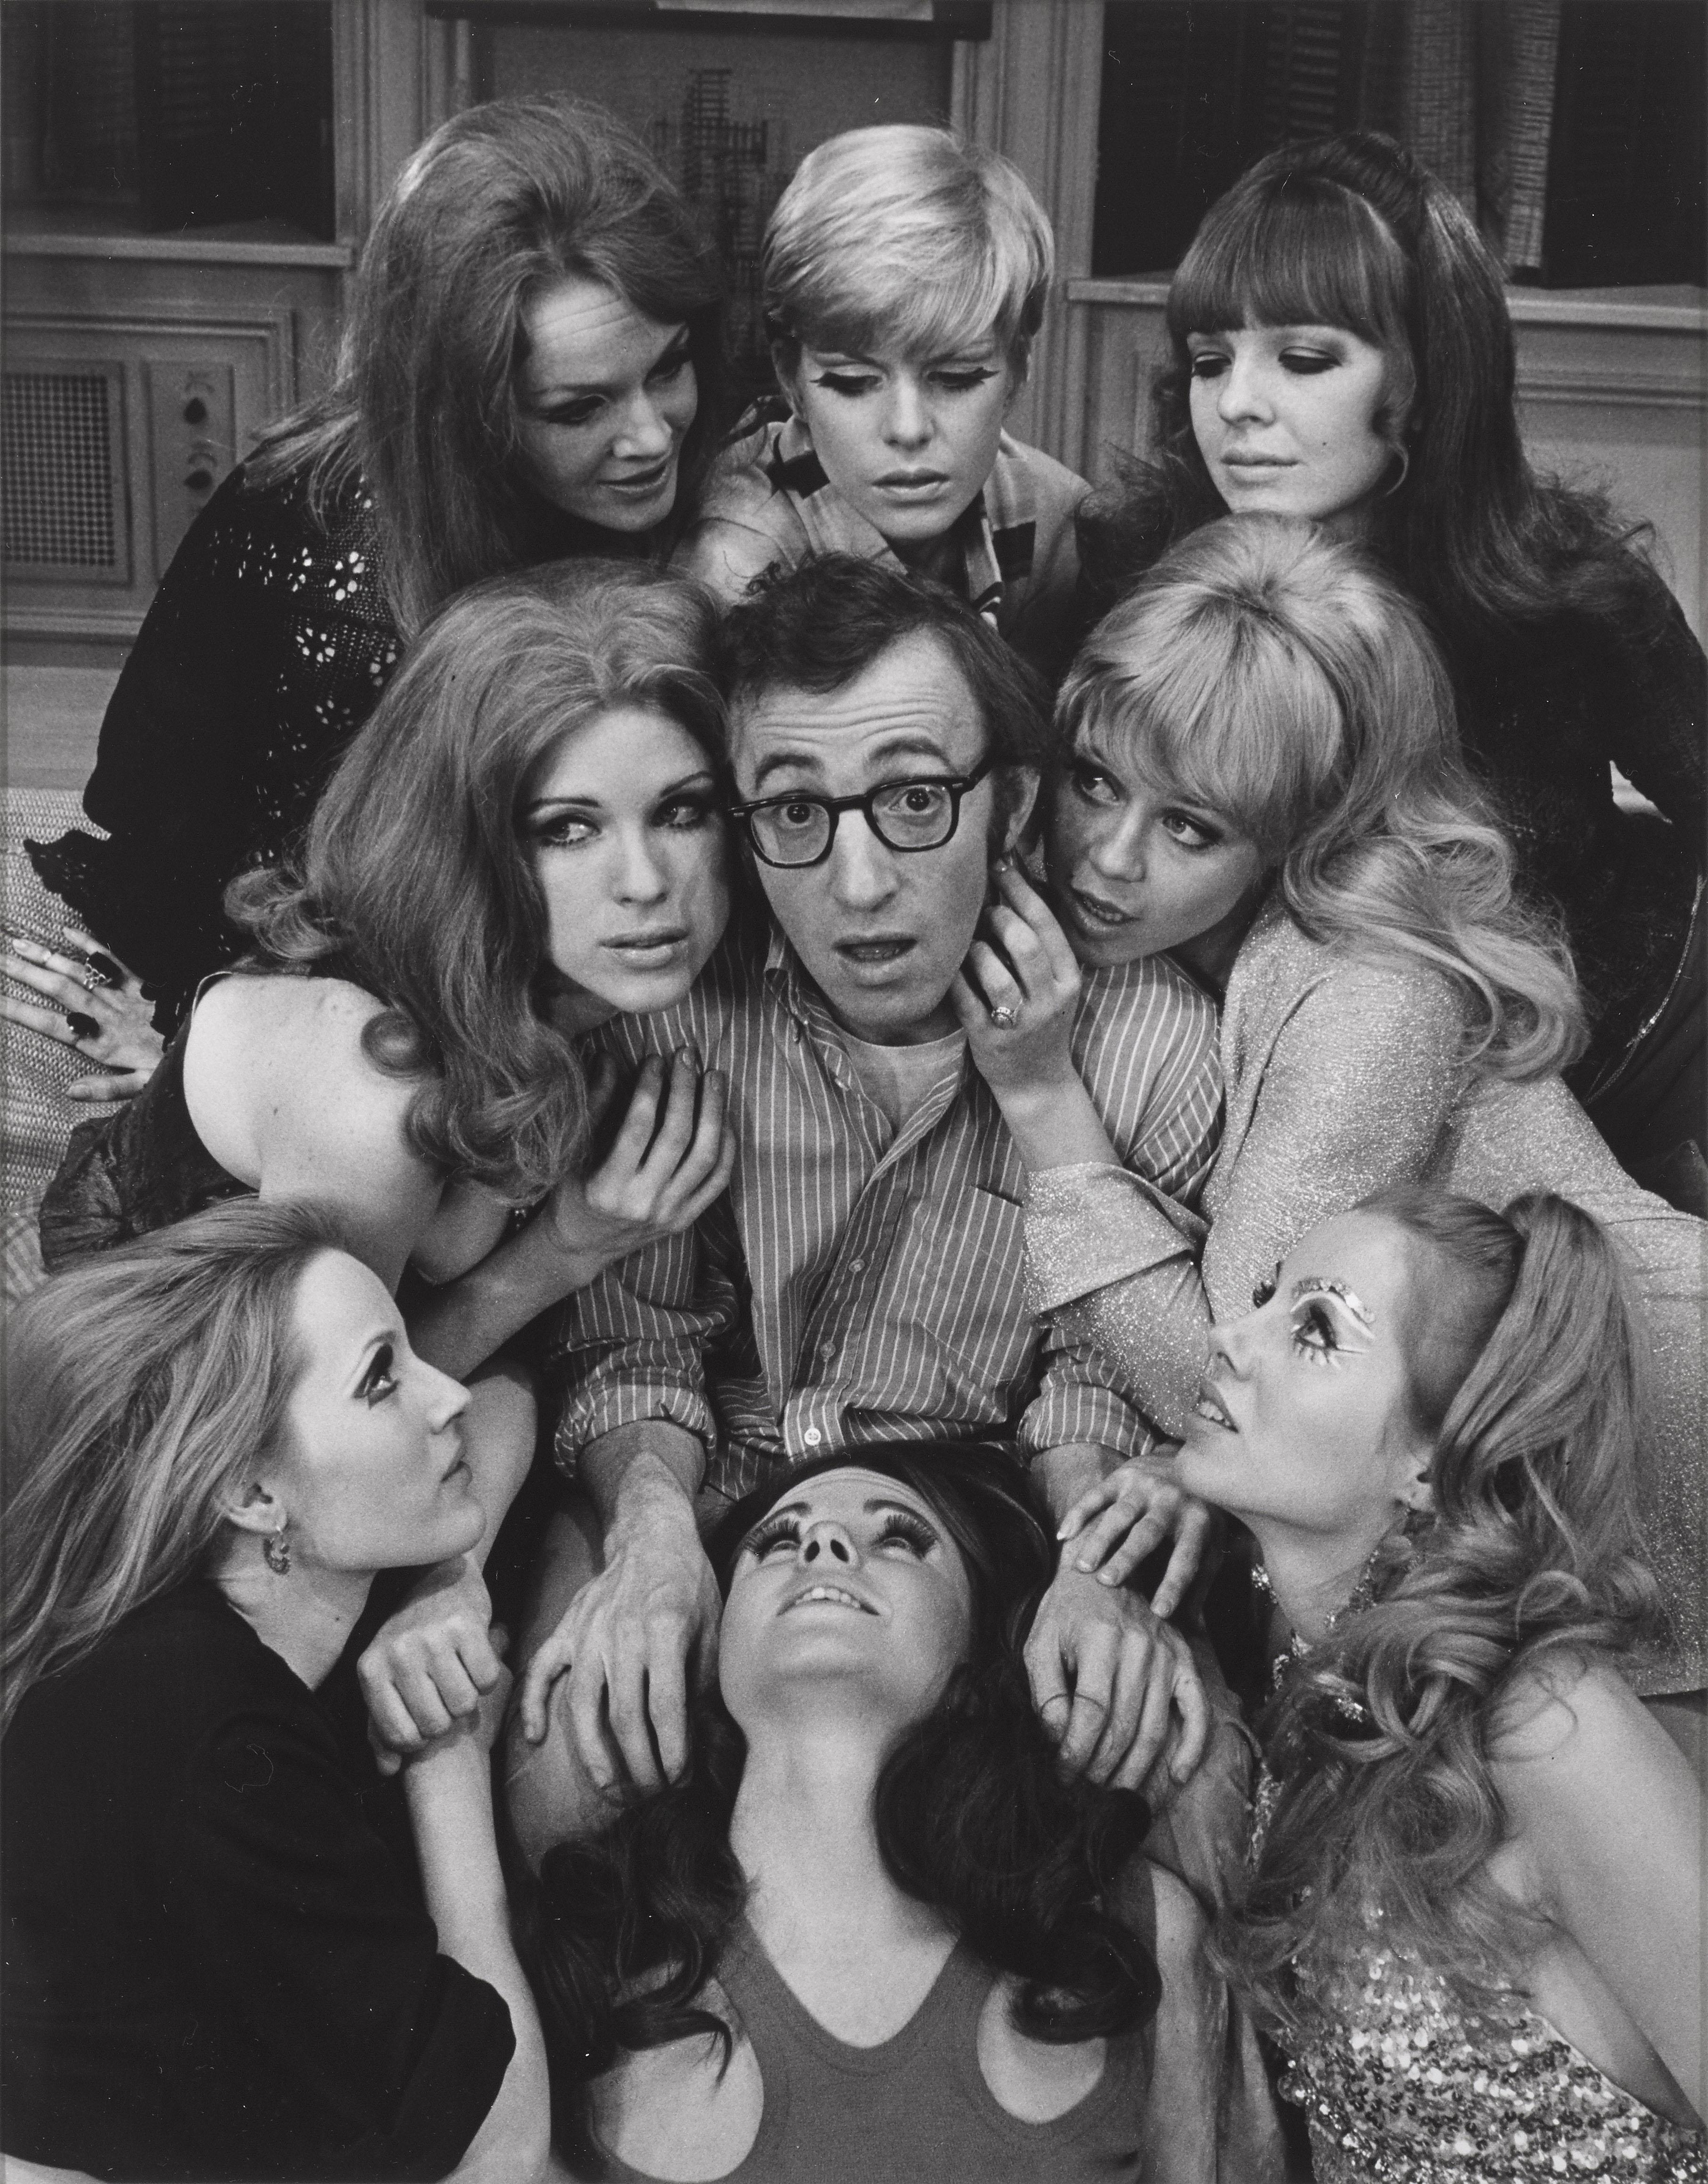 Original silver gelatin semi-gloss double-weight photograph that was taken by Philippe Halsman during production of Woody Allen's Broadway play Play It Again, Sam, featuring Allen and Diane Keaton. The photograph was part of the cover story for the